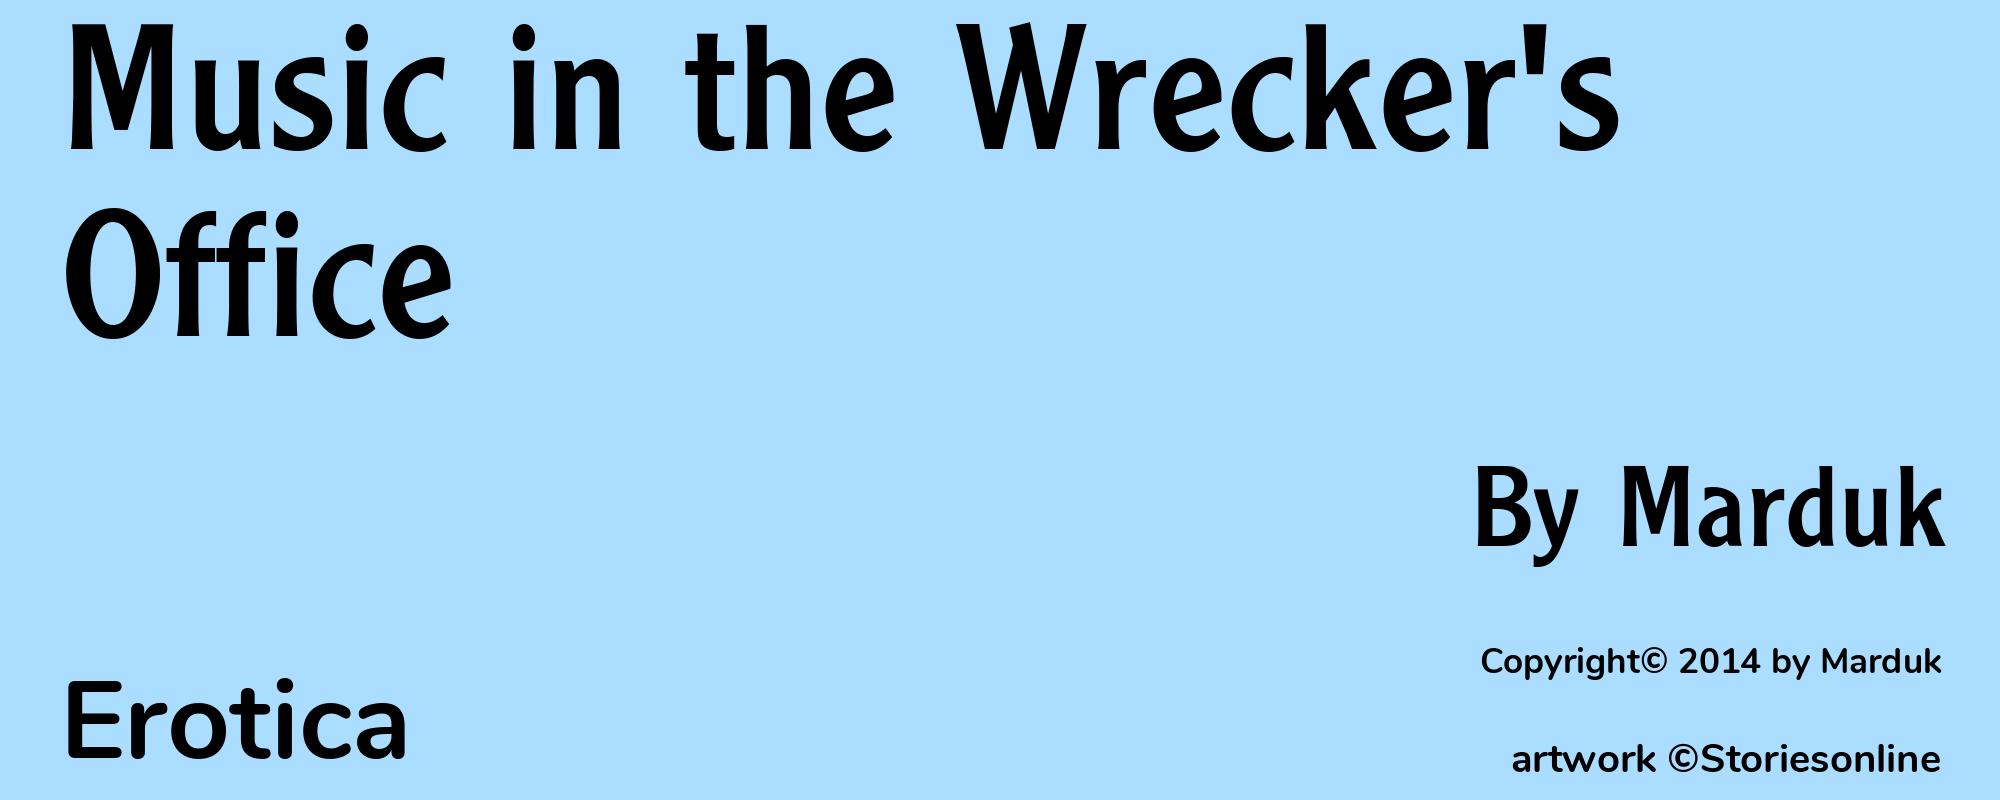 Music in the Wrecker's Office - Cover